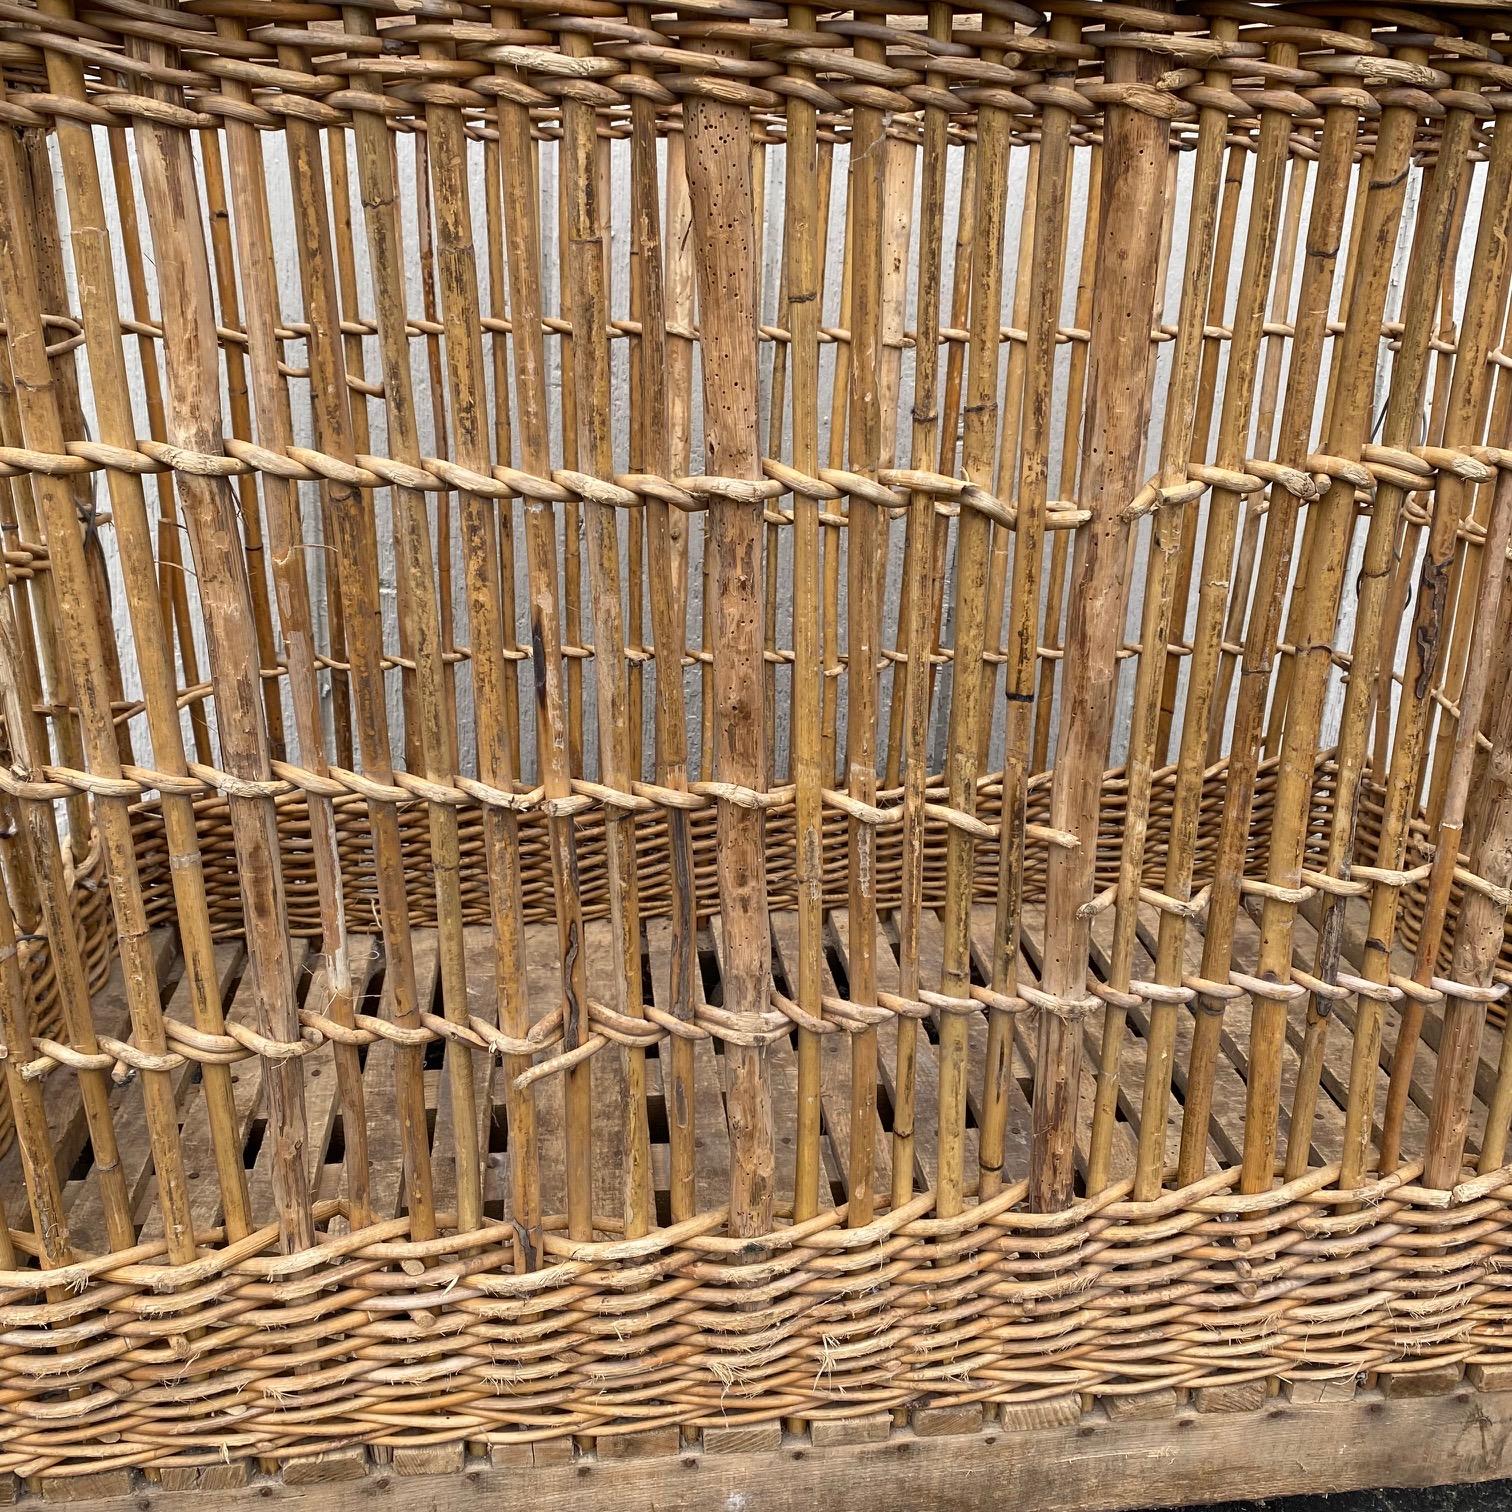 Wicker  French Very Large Boulangerie or Bakery Industrial Woven Cart Basket on Wheels